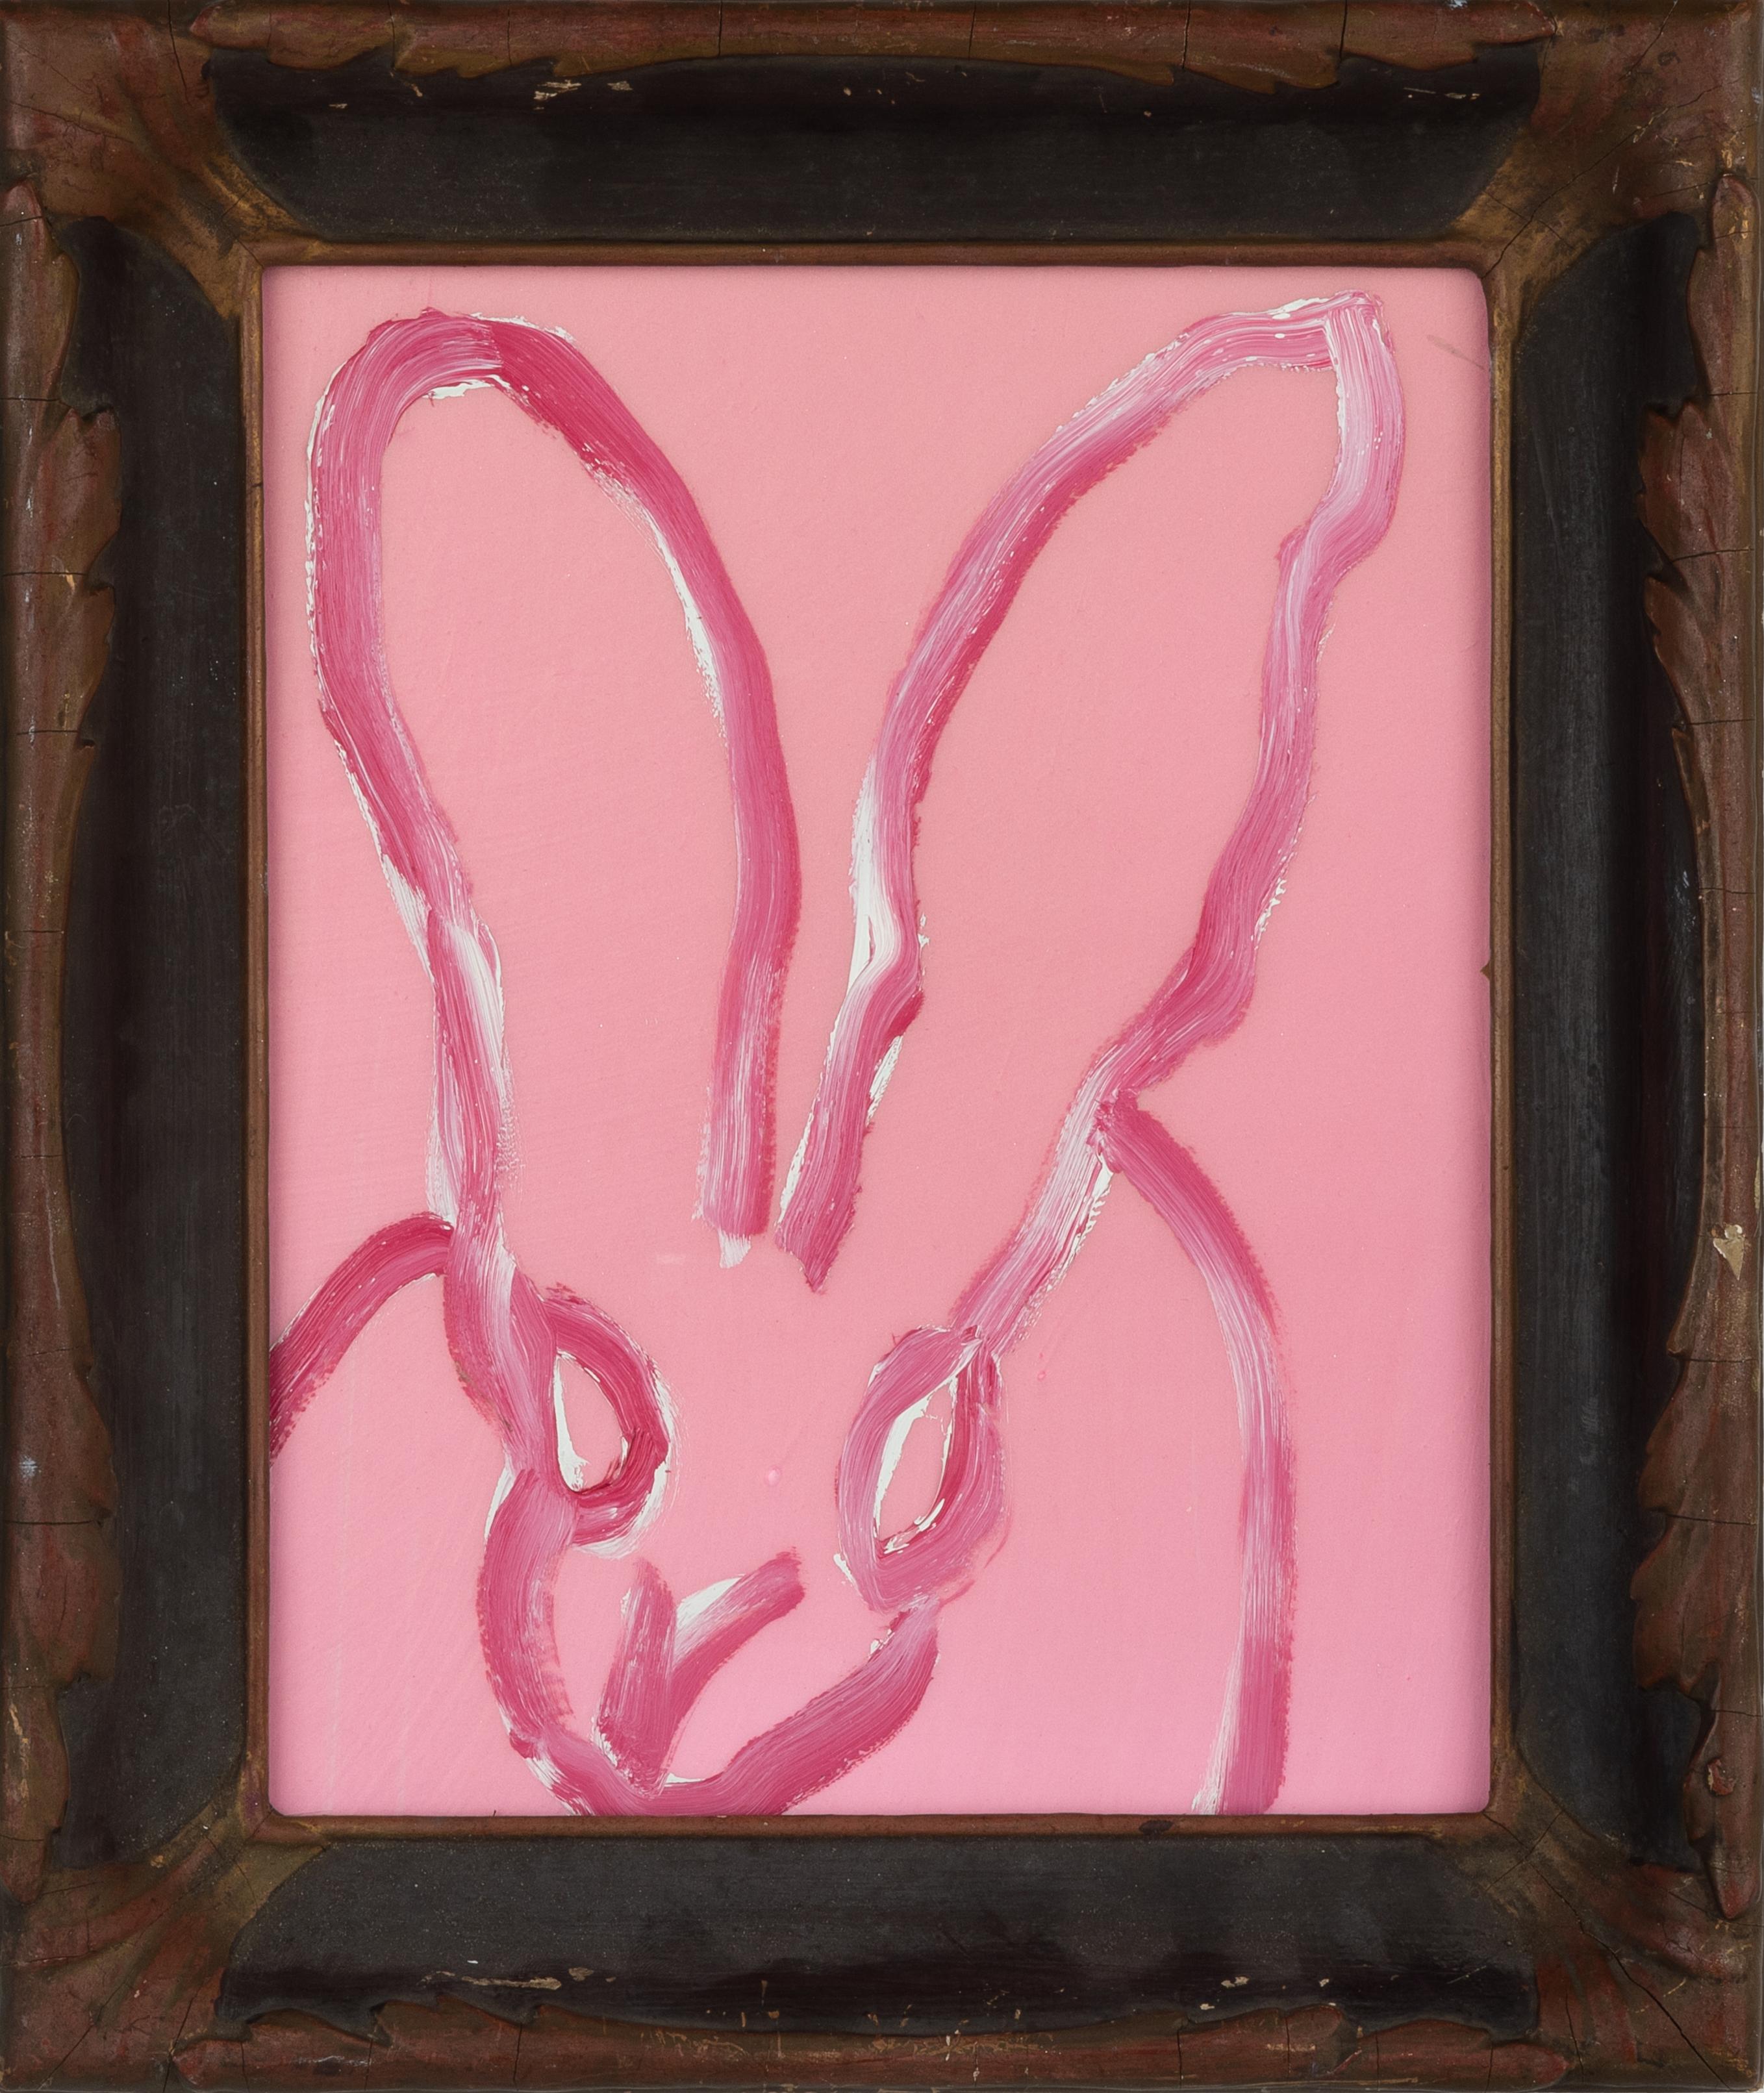 Hunt Slonem Untitled Gold & Silver Metallic Bunny
Black gestured bunny on gold and silver metallic background with wooden frame

Oil on Wood

Unframed: 10 x 8 in.
Framed: 13 x 11 in.

Hunt Slonem is a well-renowned American artist is known for his